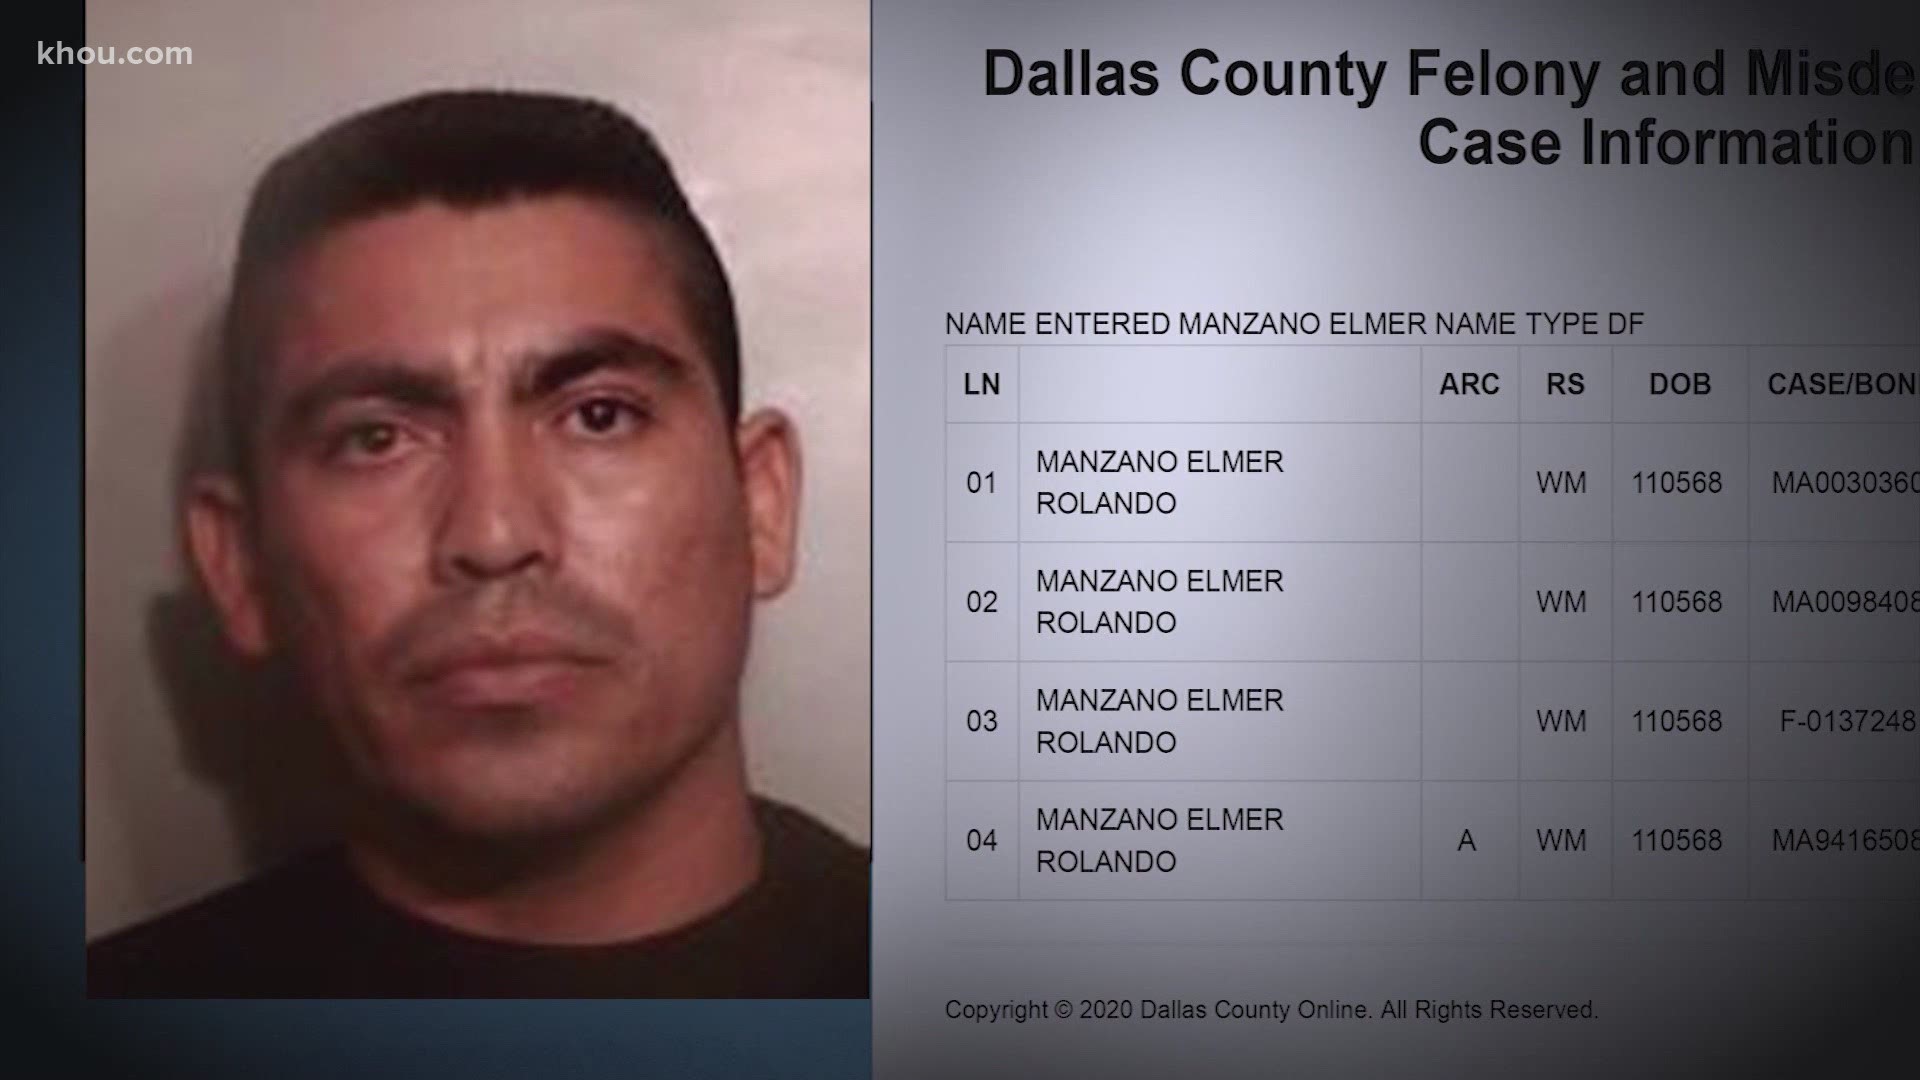 Elmer Manzano had a history of violence prior to Tuesday's deadly shooting.